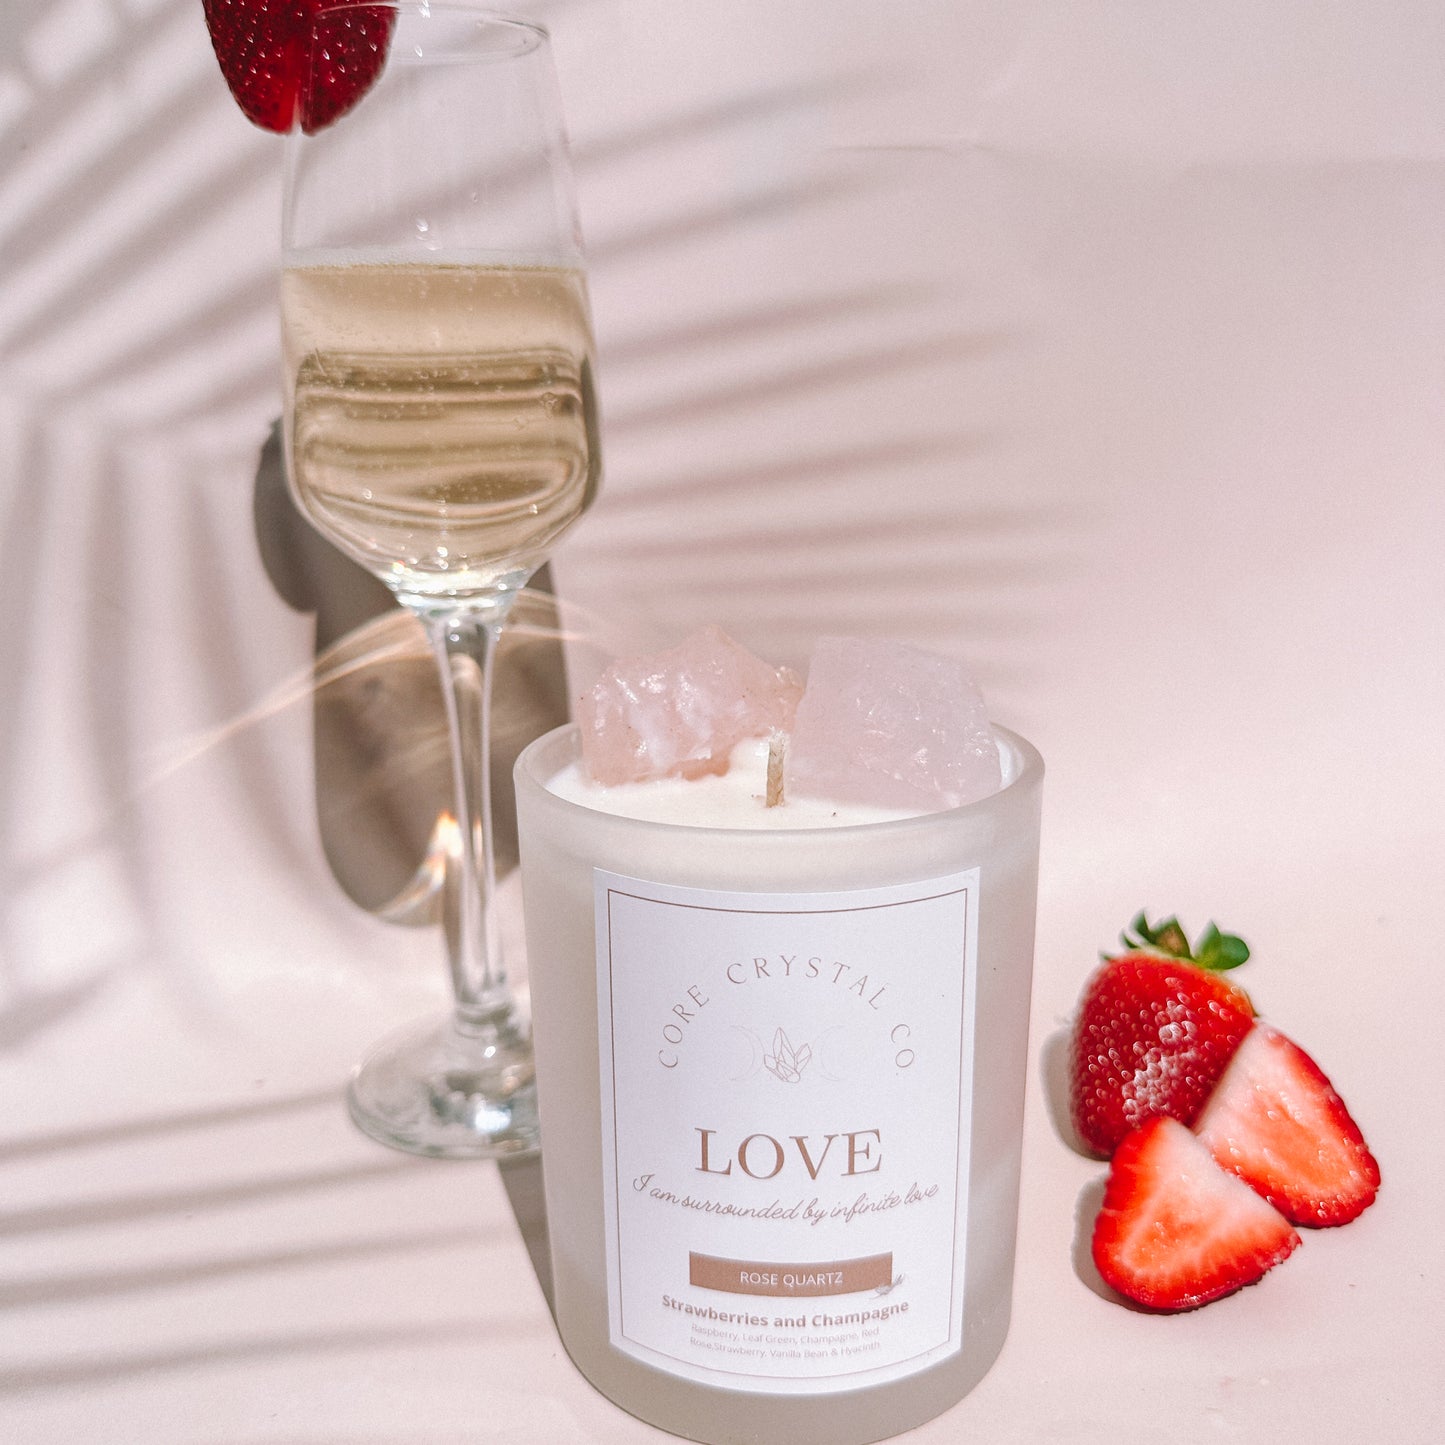 LOVE Strawberry & Champagne Crystal Infuse Candle